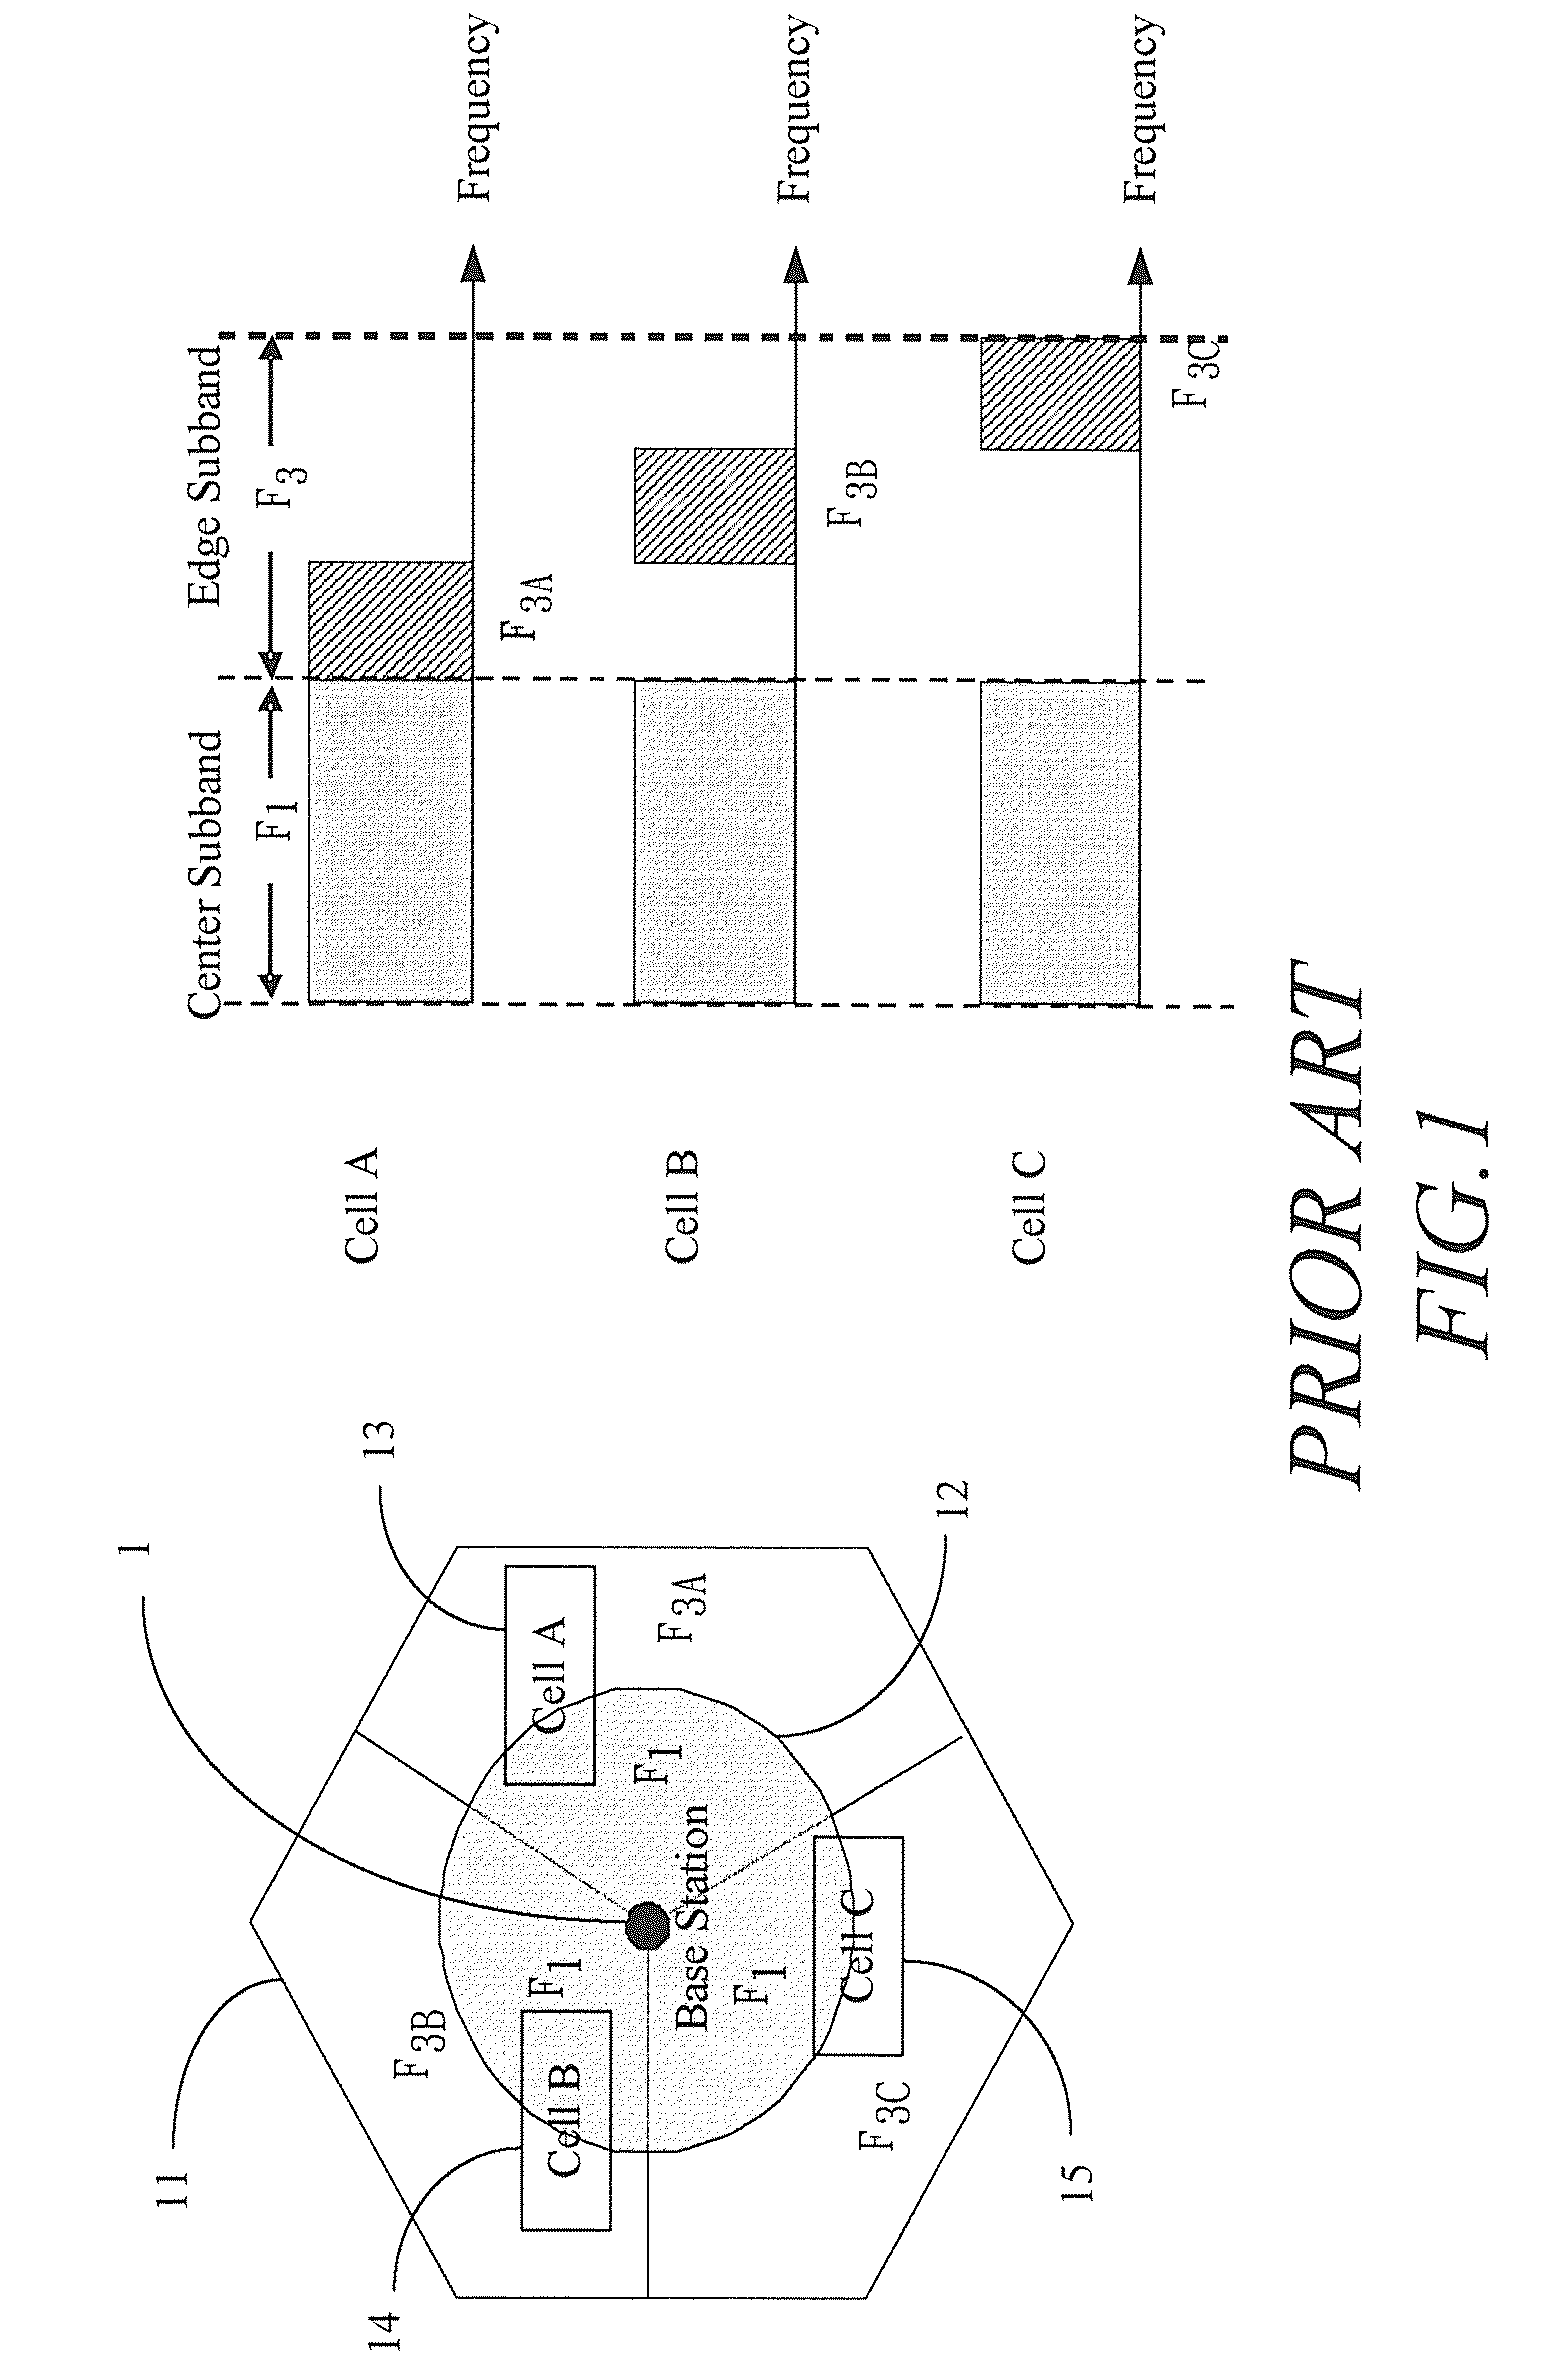 User grouping method for inter-cell interference coordination in mobile telecommunication